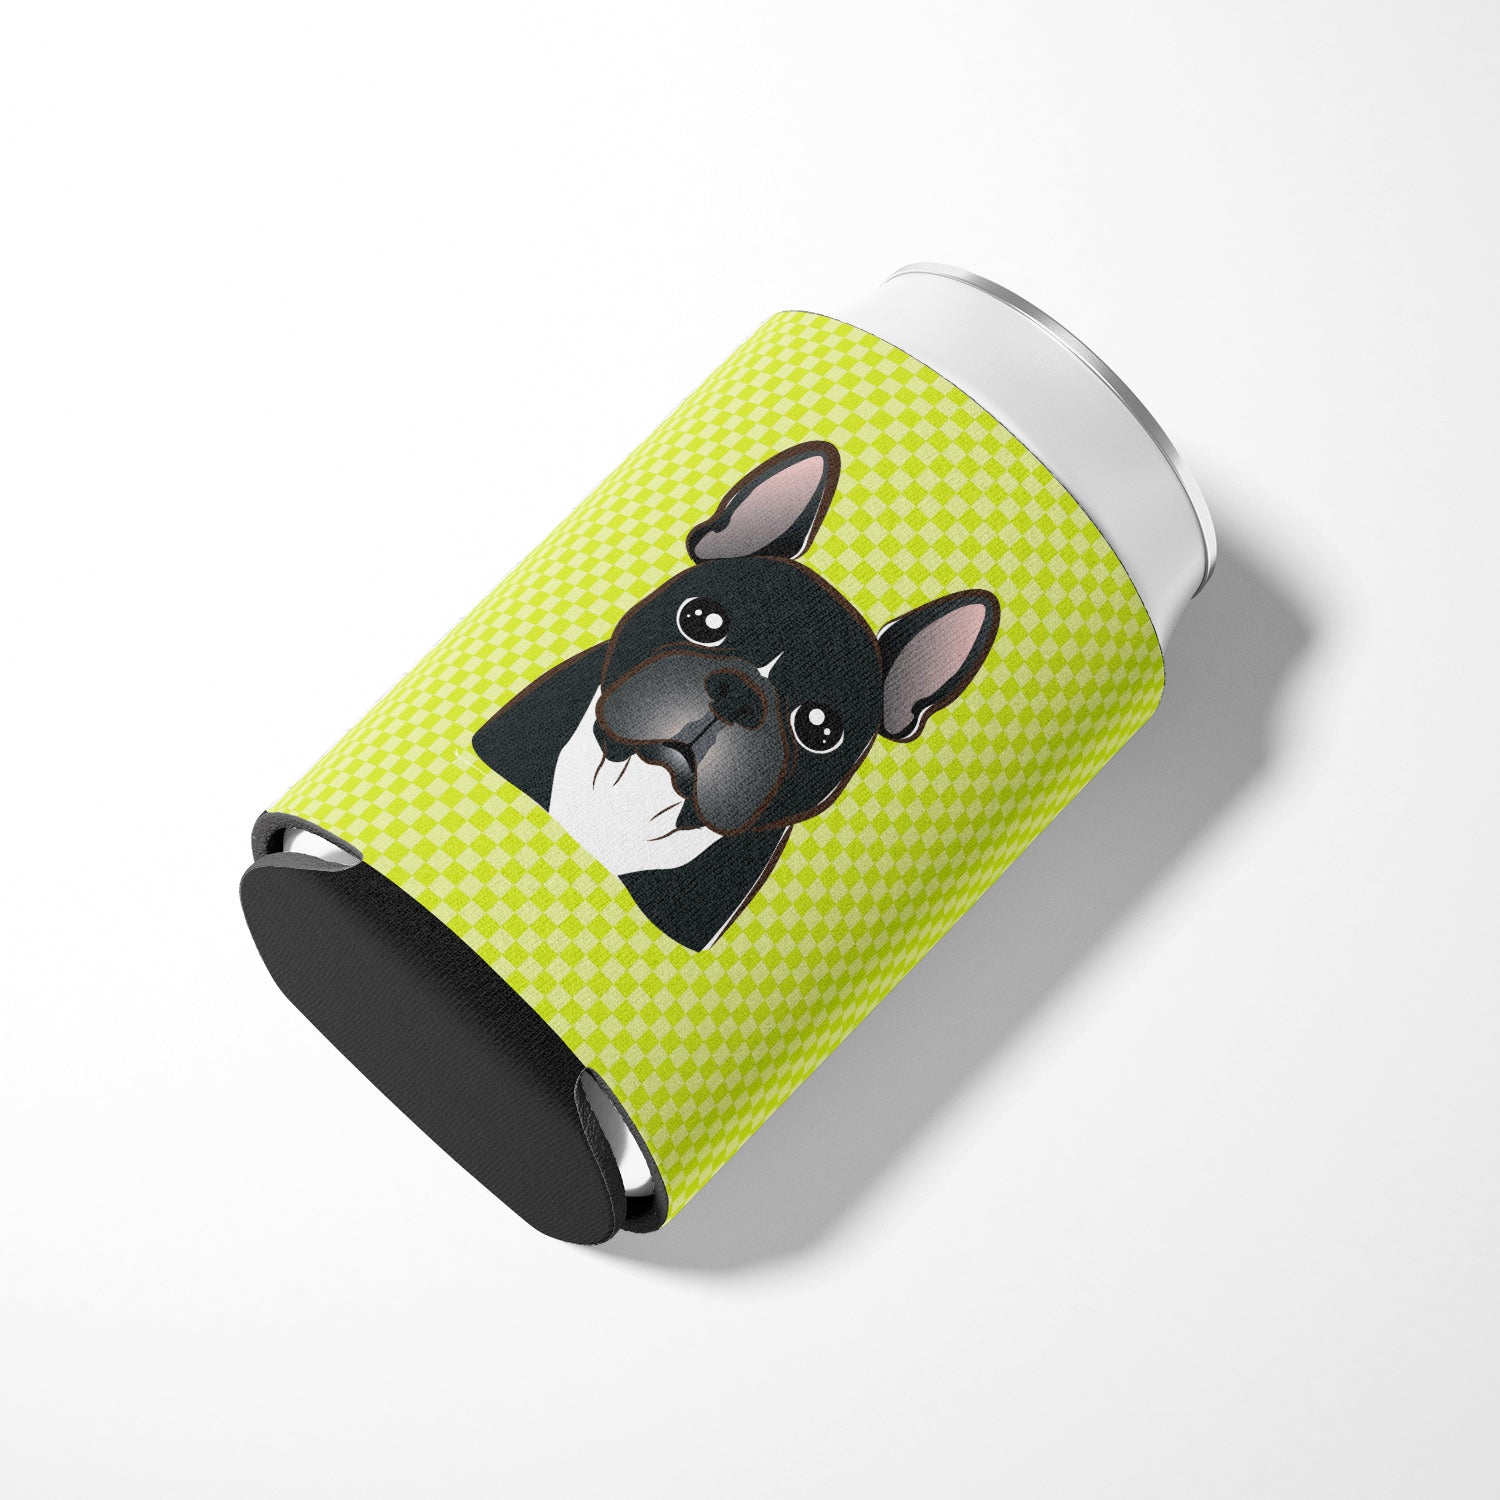 Checkerboard Lime Green French Bulldog Can or Bottle Hugger BB1289CC.